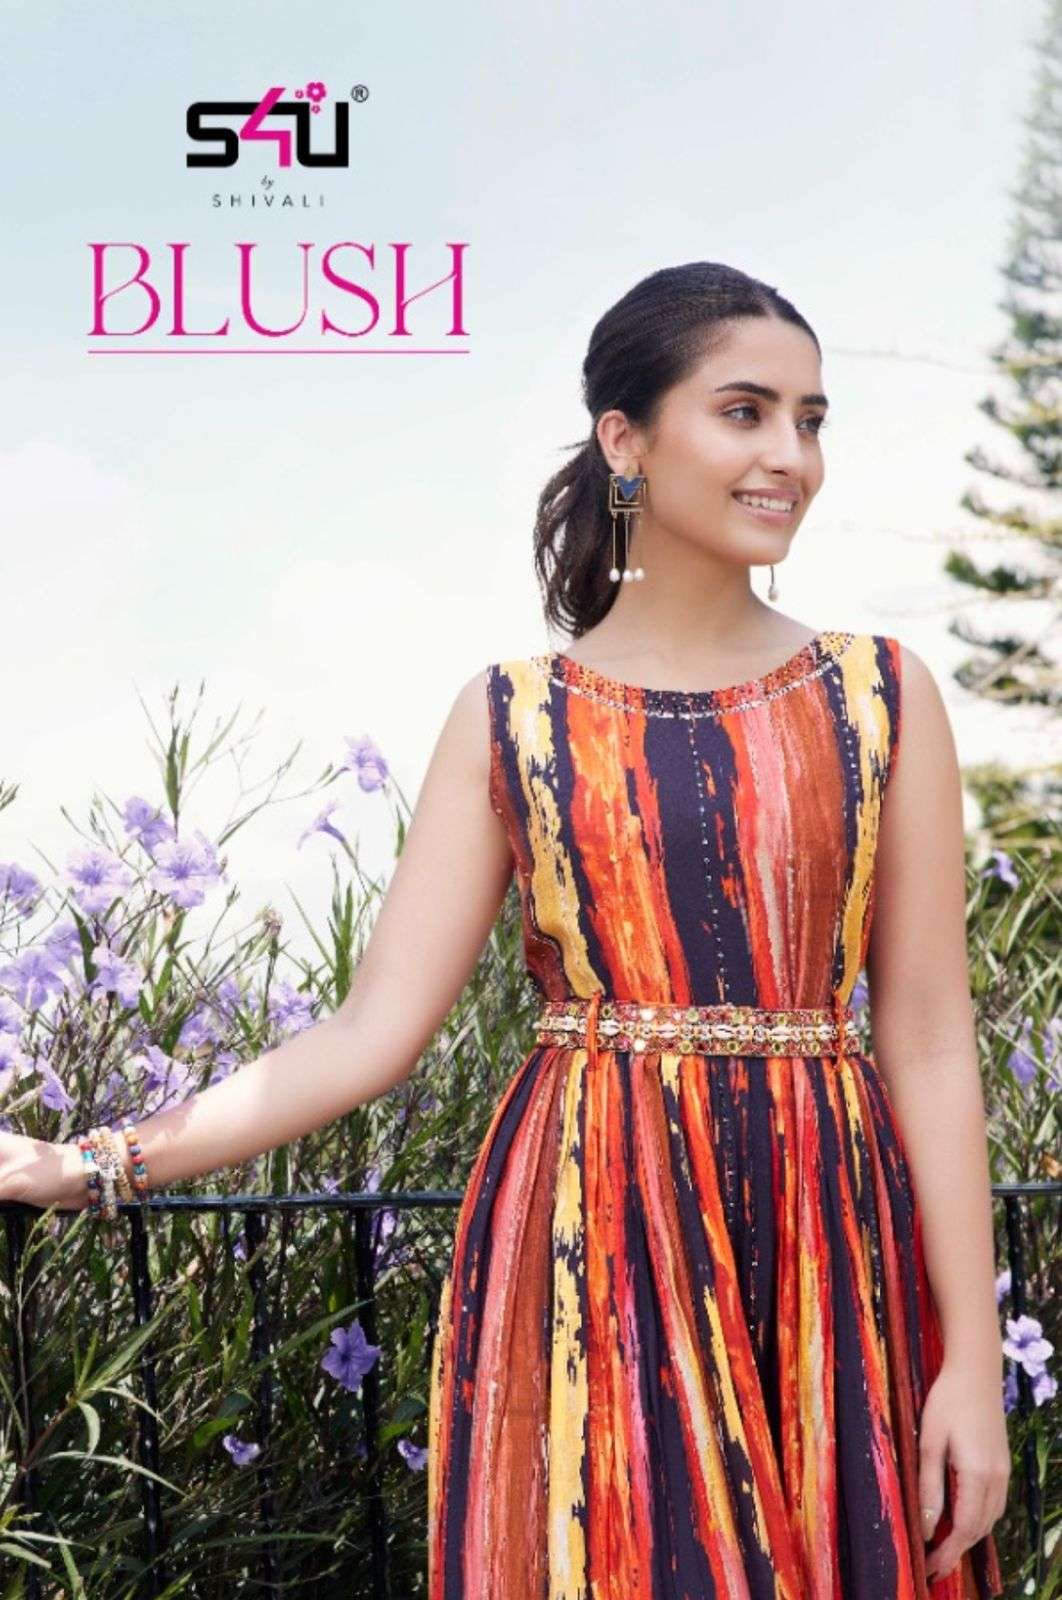 S4U PRESENTS BLUSH 01-05 SERIES SEQUENCE MUSLIN KURTIS COLLECTION AT WHOLESALE PRICE 7019